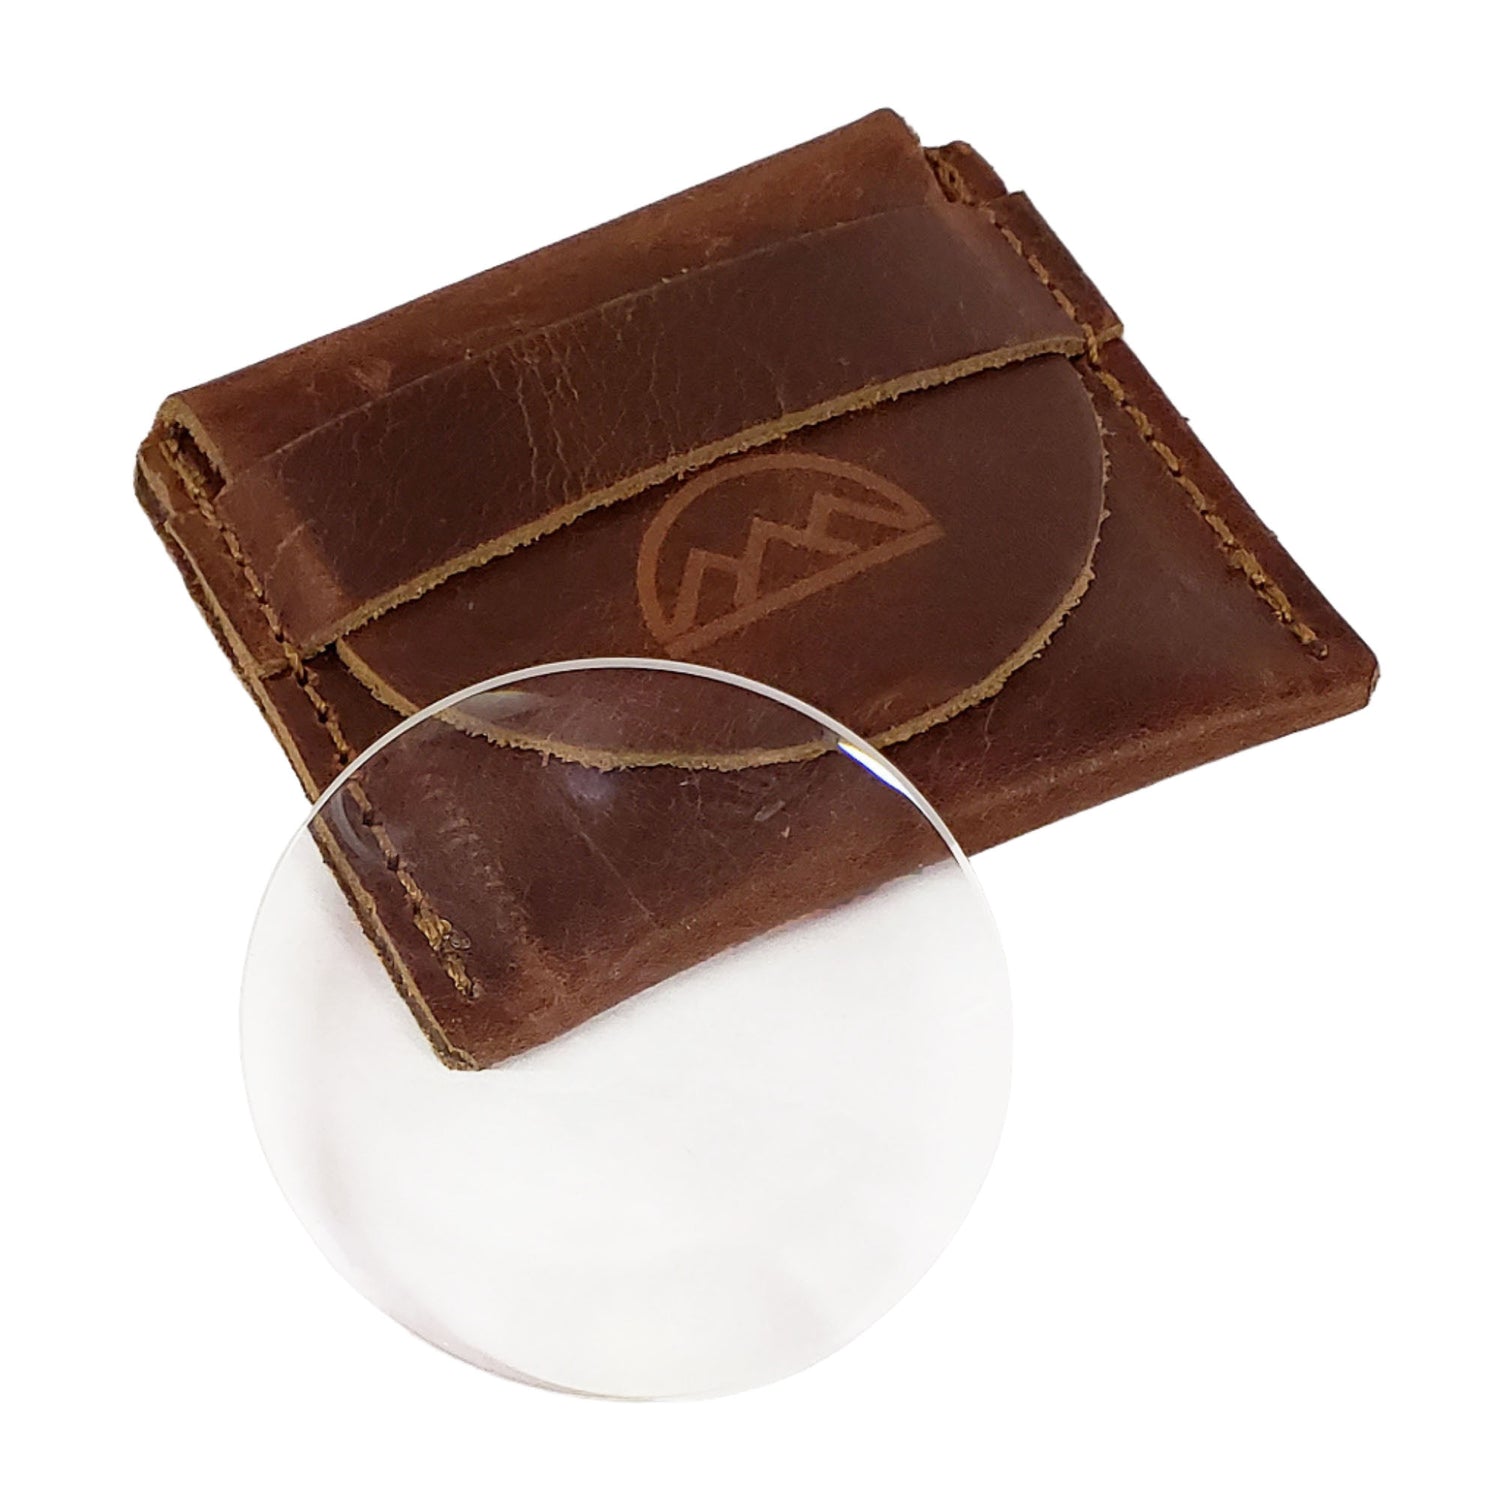 Pocket magnifier with leather case